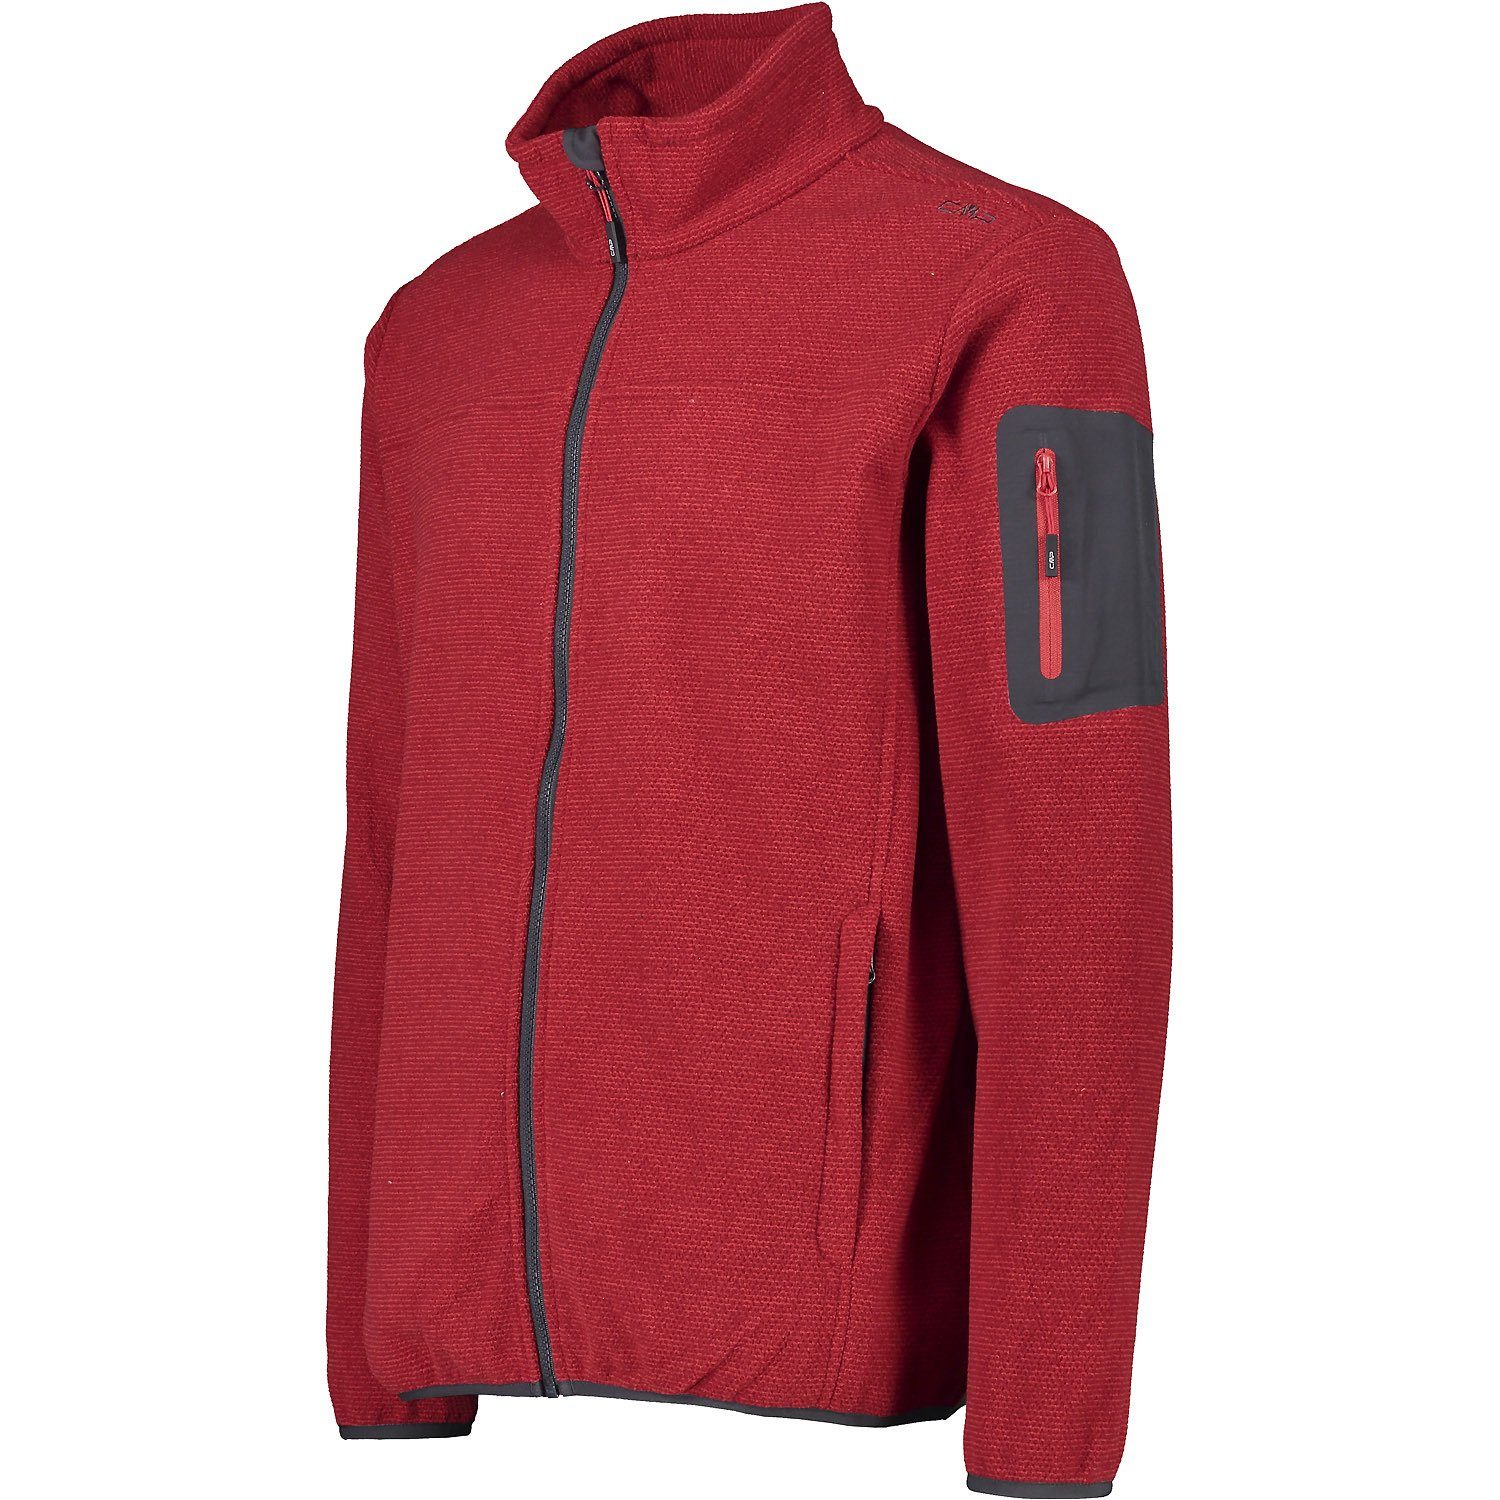 Knitted CAMPAGNOLO Jacquard Red Fire Cardigan Strickjacke (1-tlg) Jacket